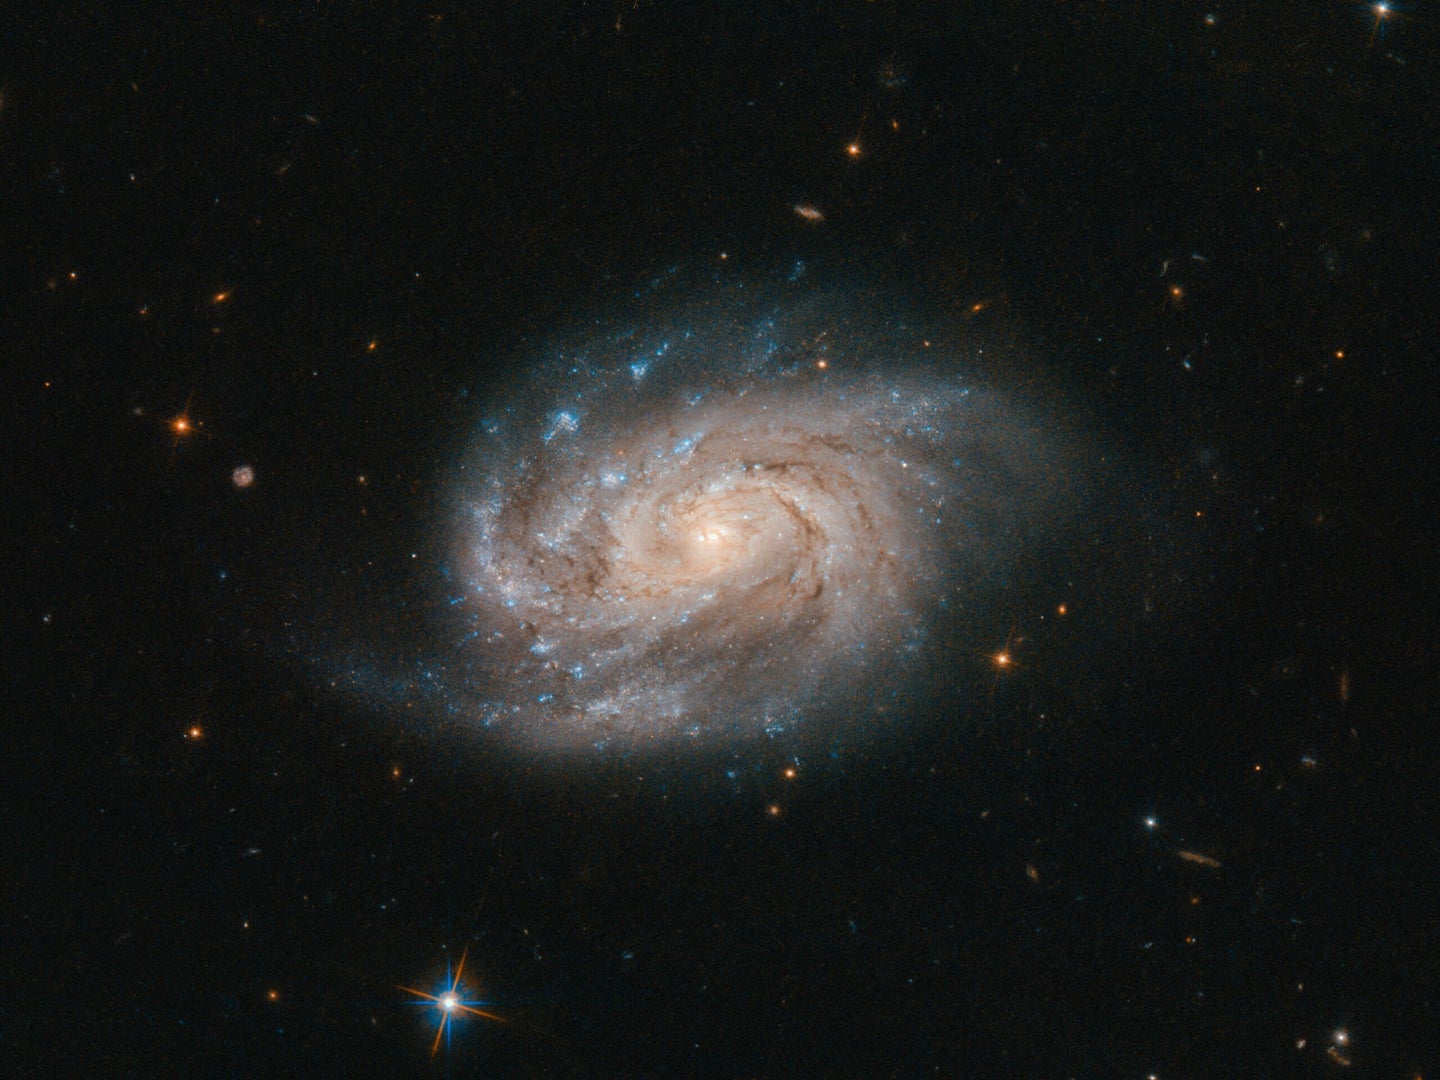 A galaxy named NGC 1803 as imaged by the Hubble Space Telescope.